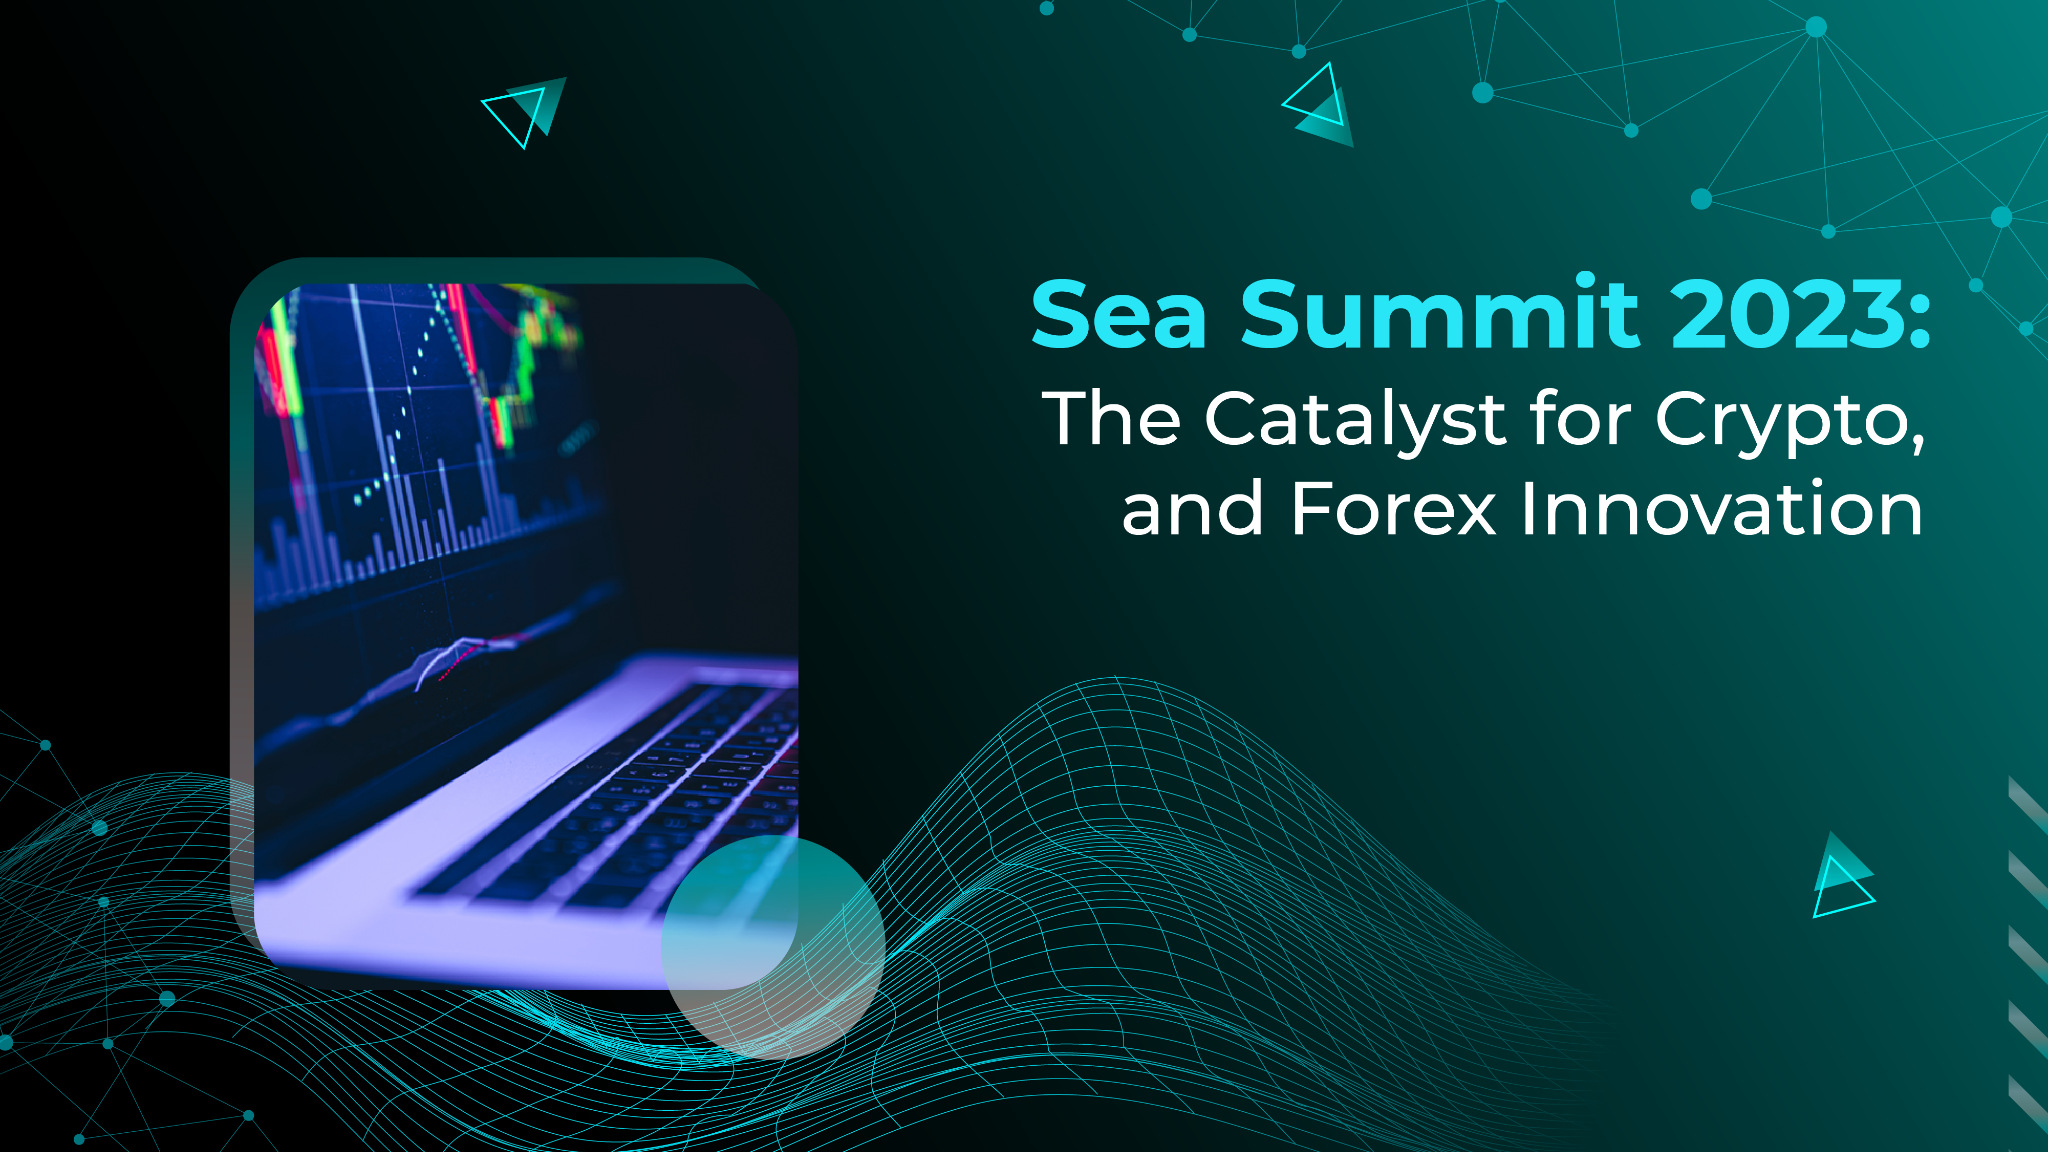 Sea Summit 2023: The Catalyst for Crypto and Forex Innovation